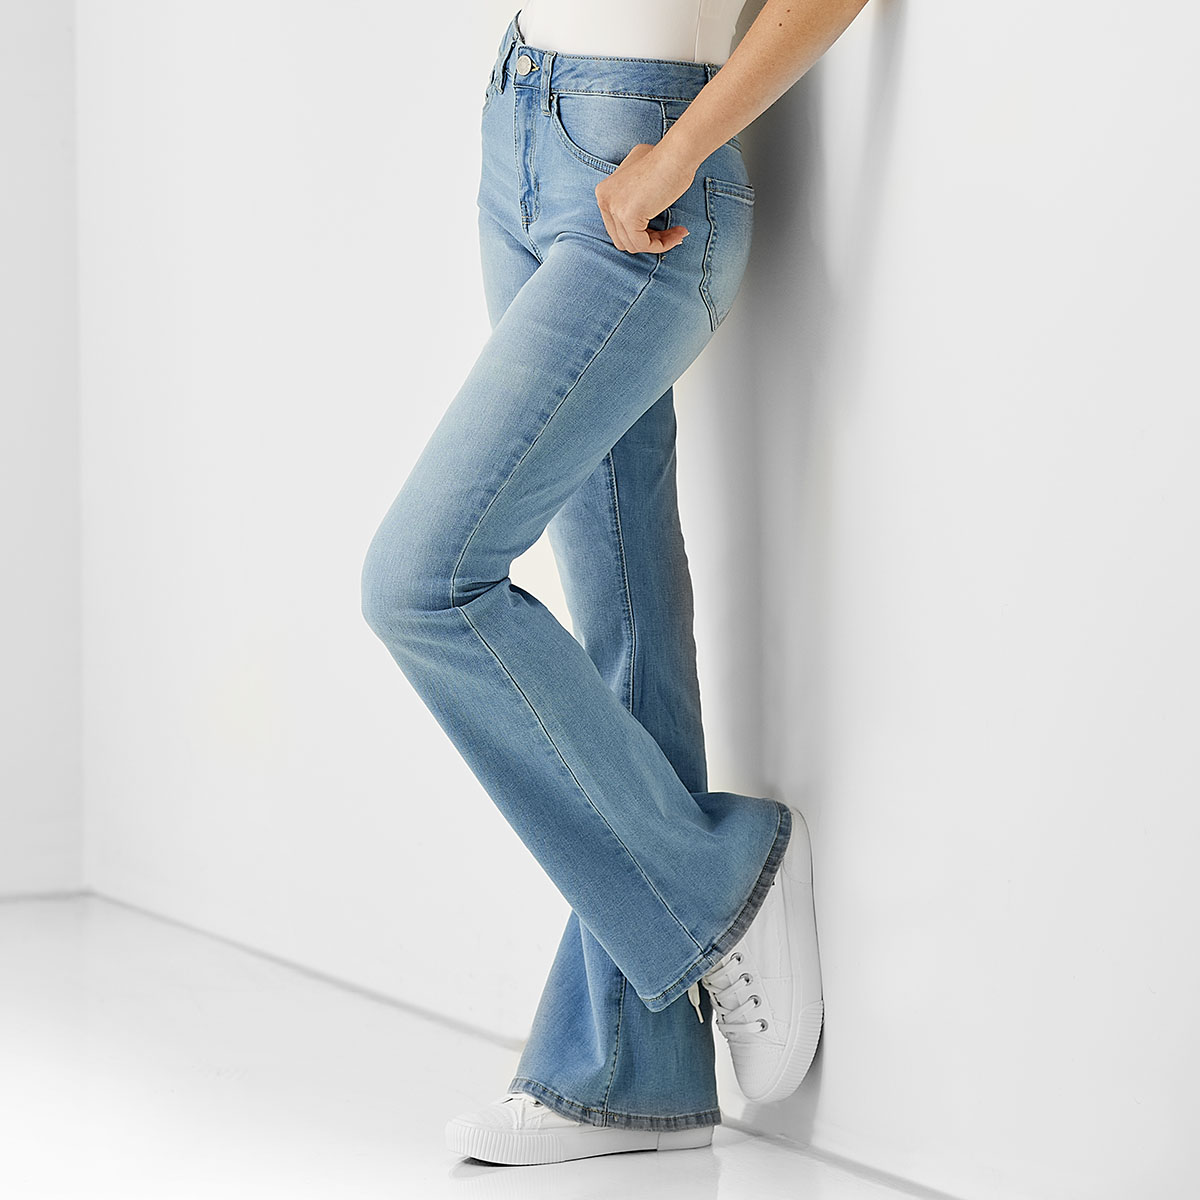 Juniors YMI(R) Basic 5 Pocket One Button Flare Jeans